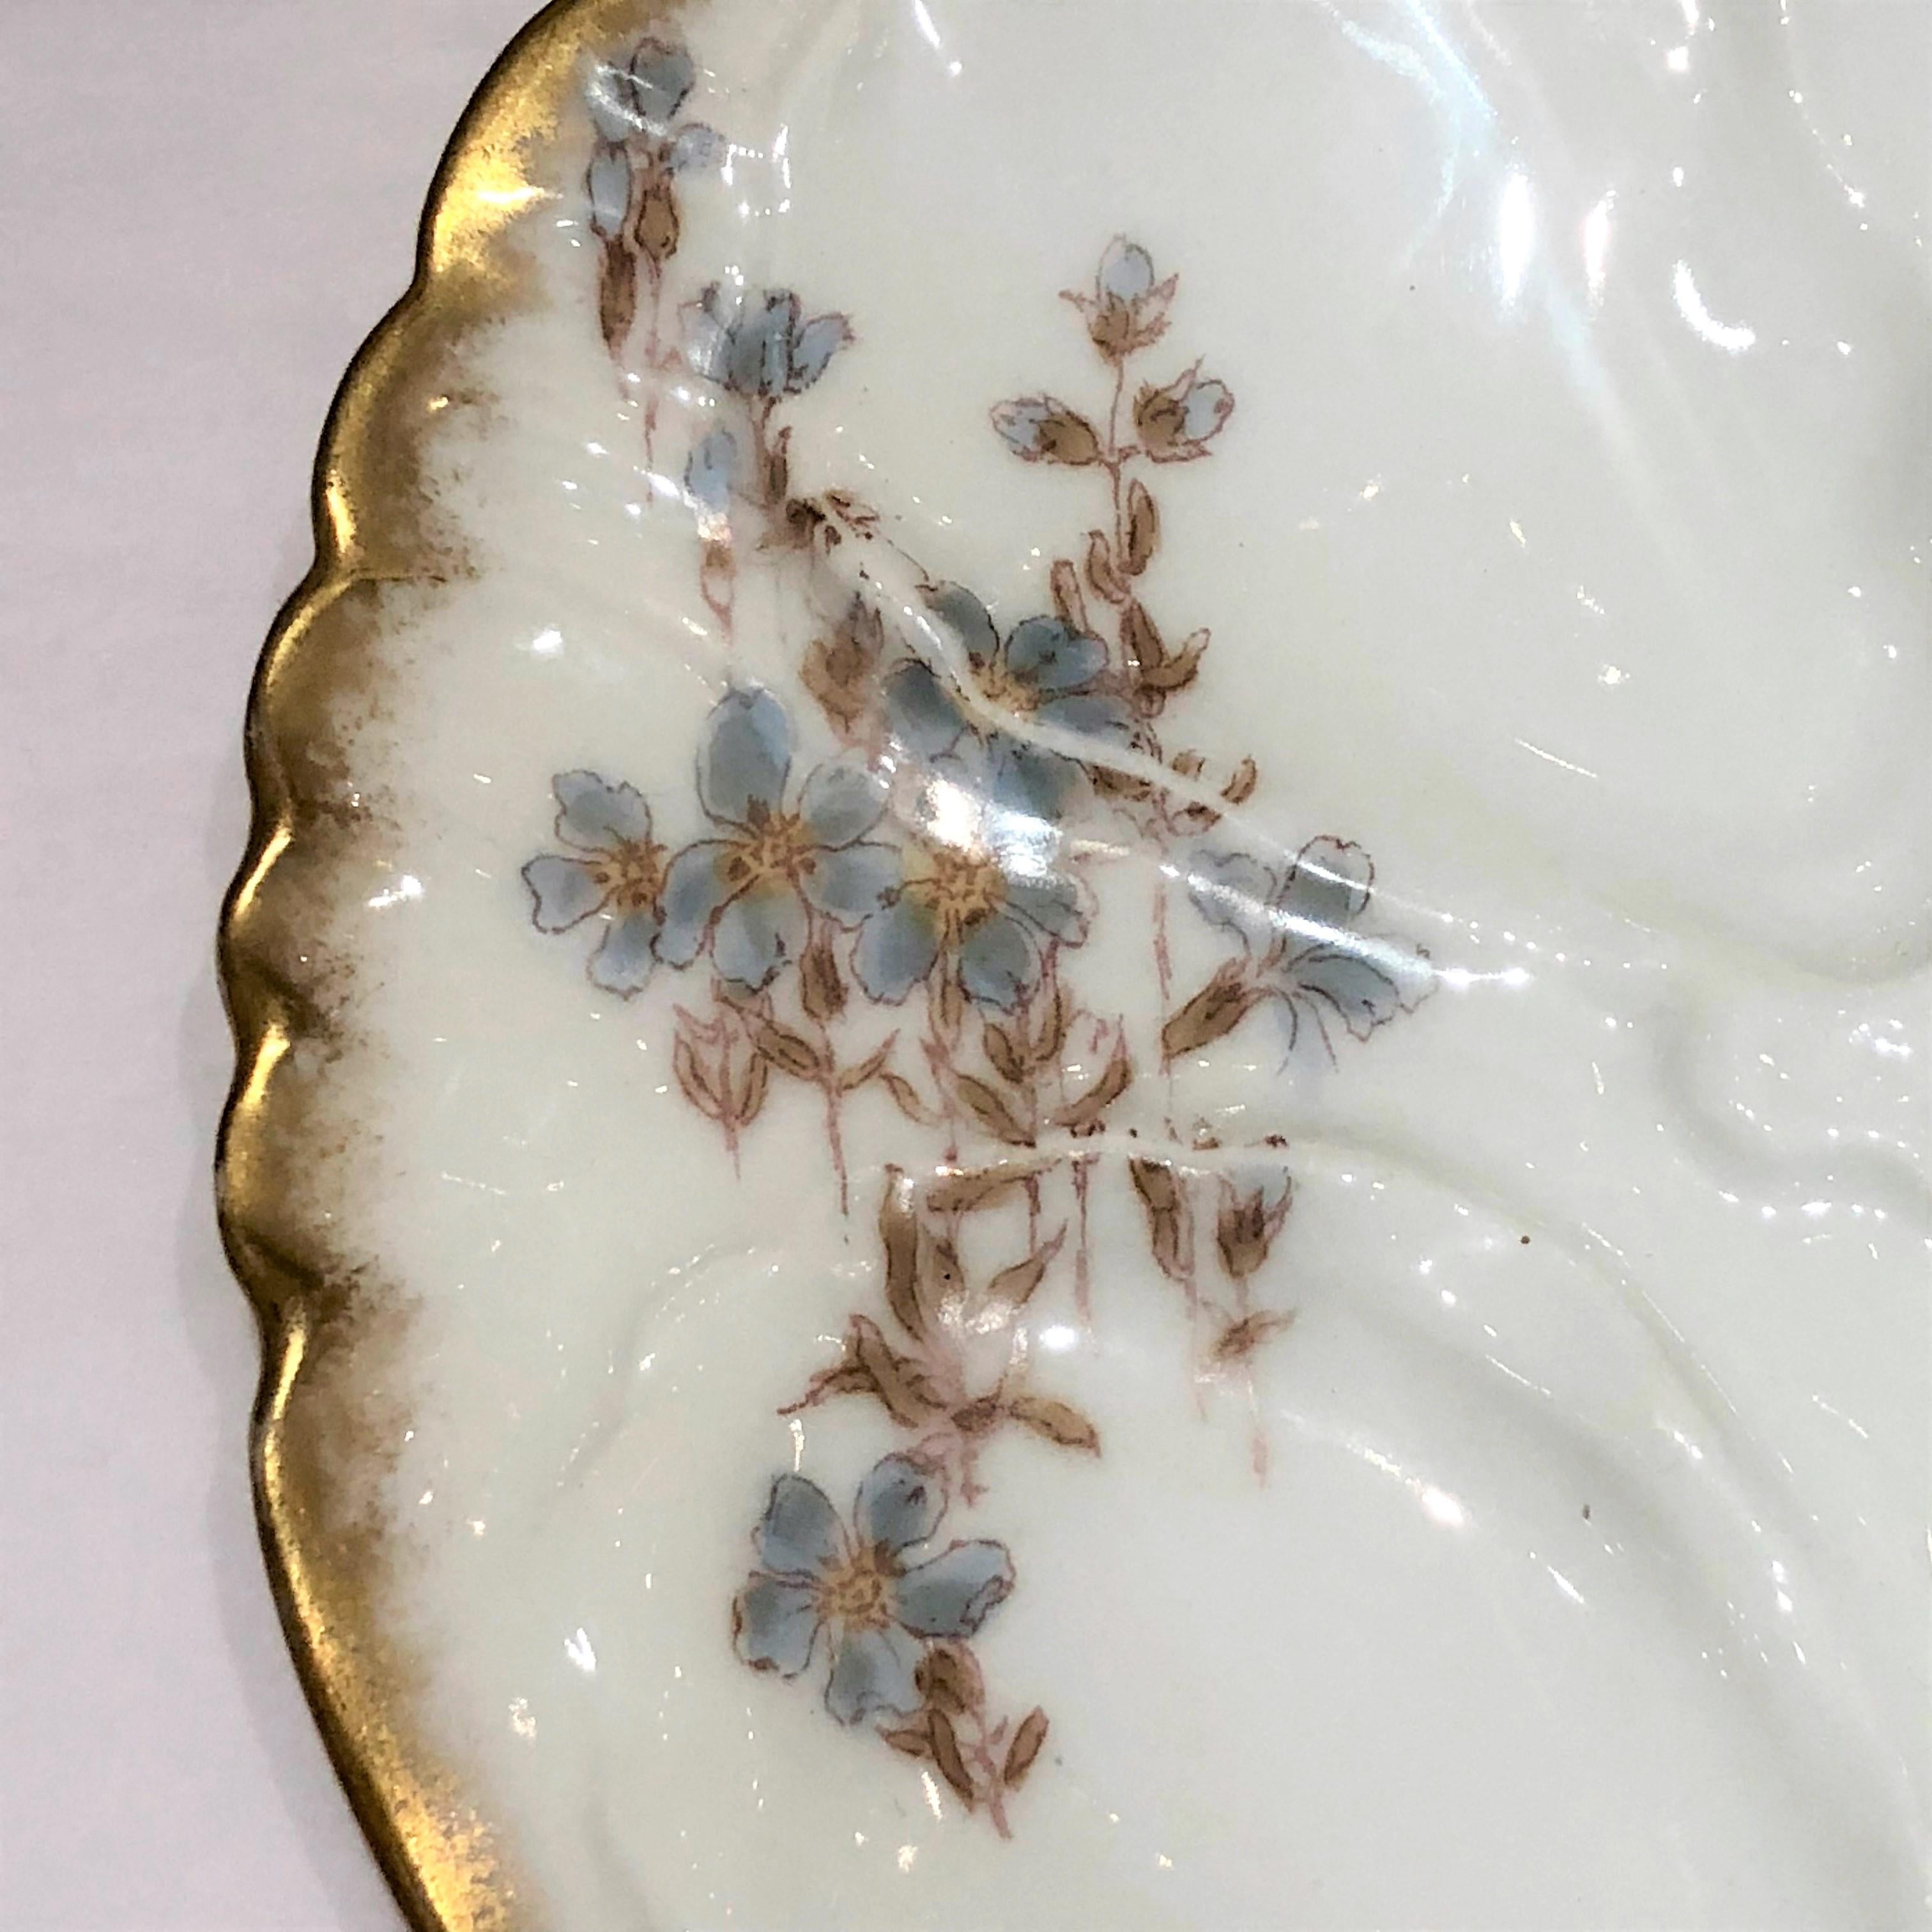 Antique French CFH Haviland Limoges hand-painted porcelain oyster plate, circa 1880-1890.